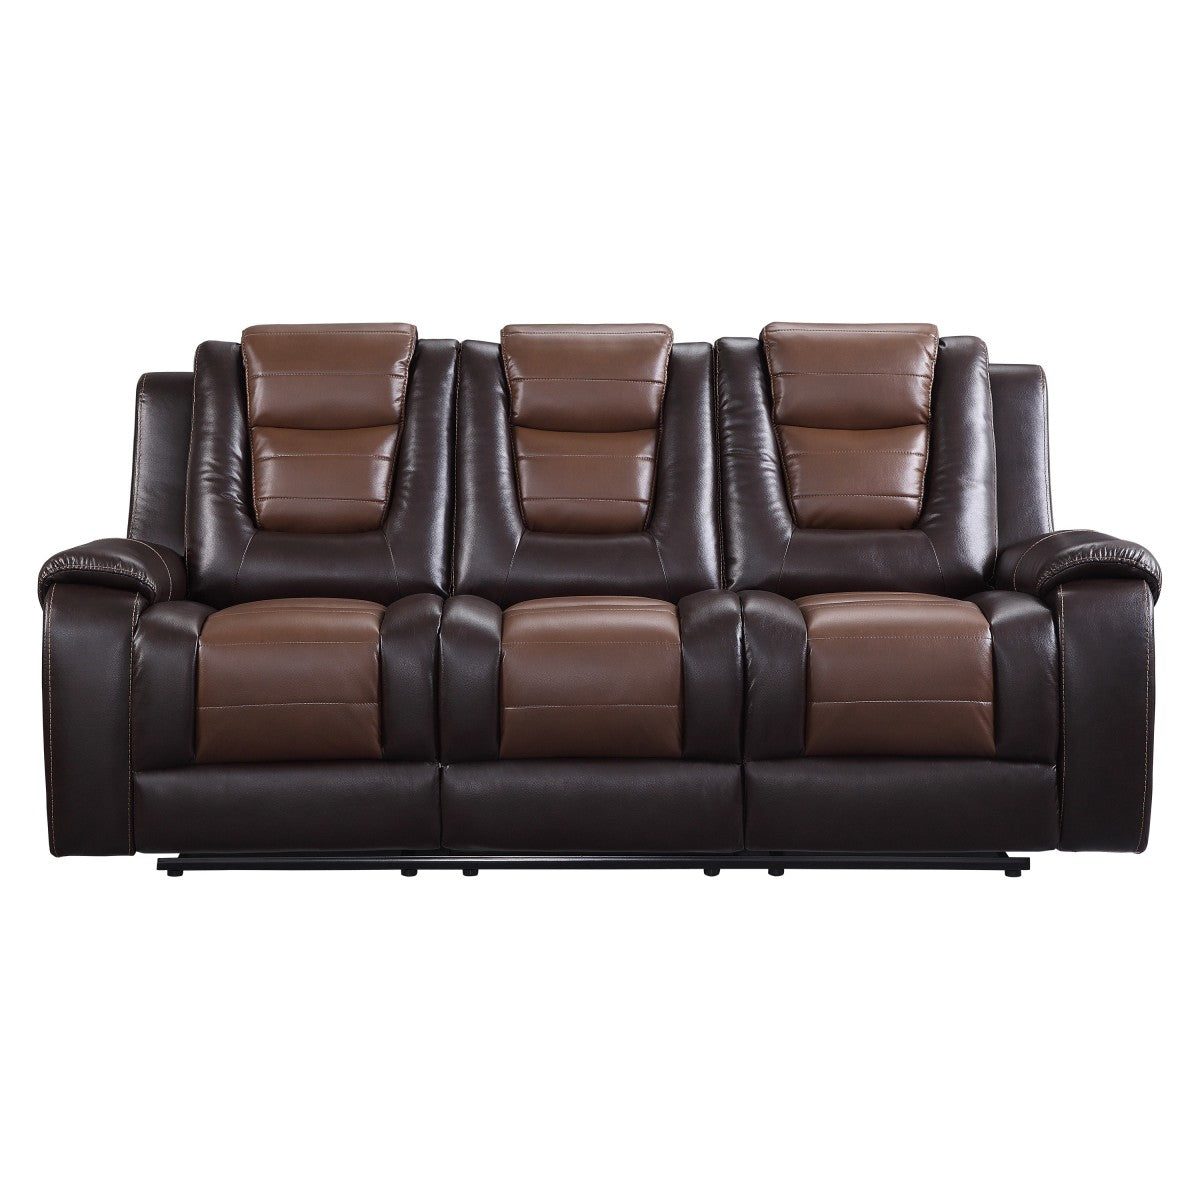 Briscoe Brown Double Reclining Sofa with Drop-Down Cup Holders